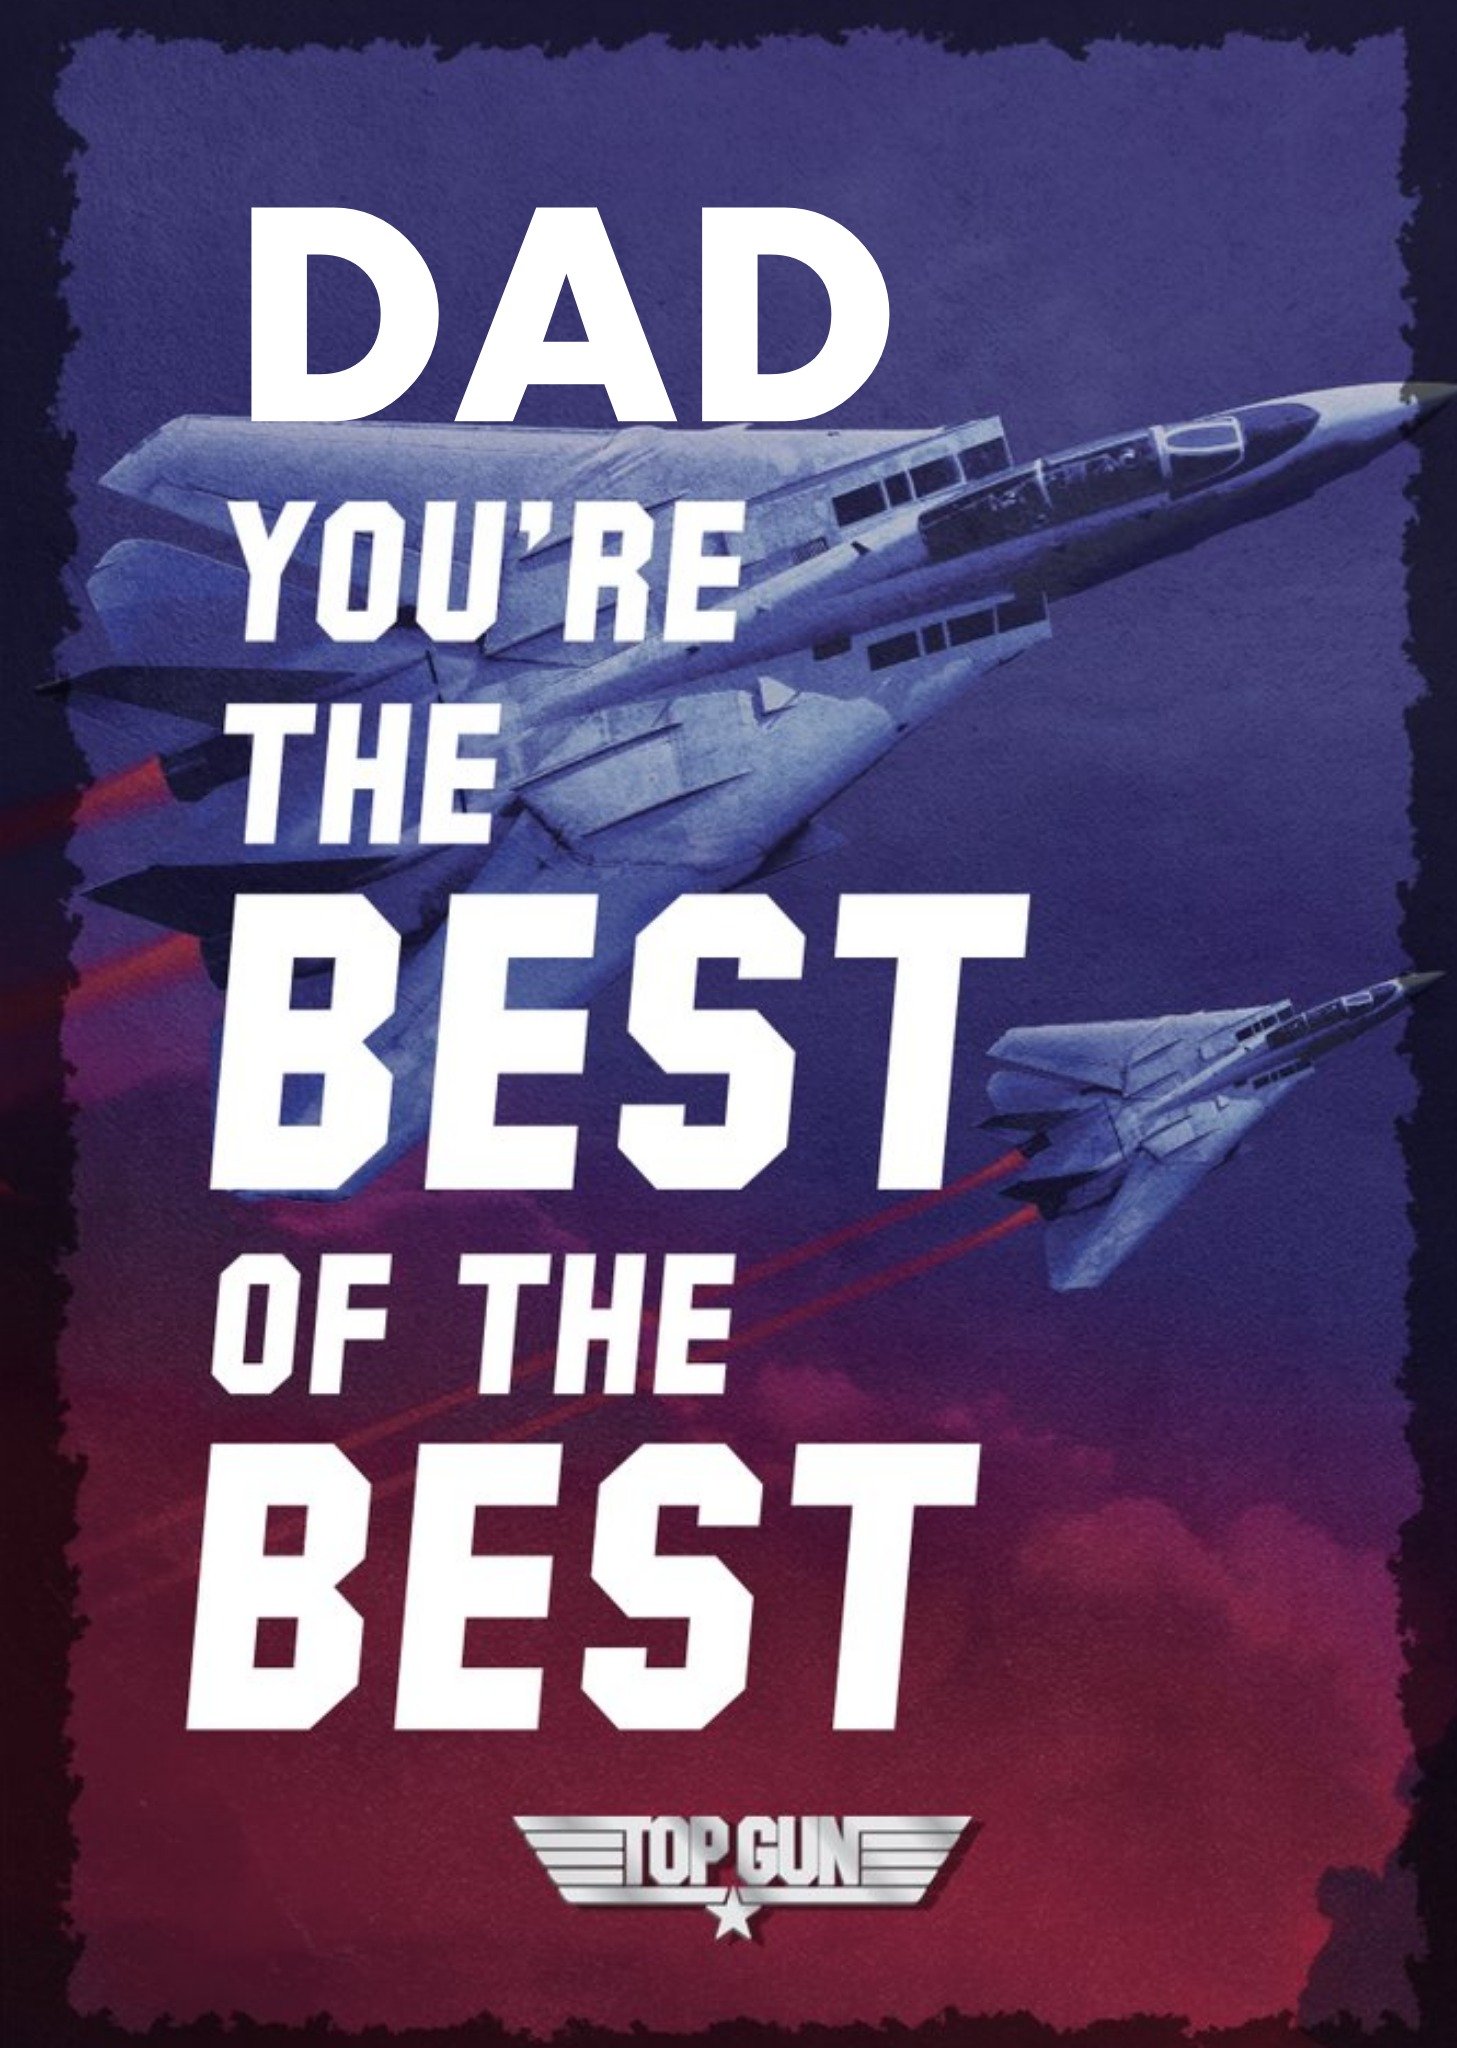 Other Top Gun You're The Best Of The Best Birthday Card Ecard